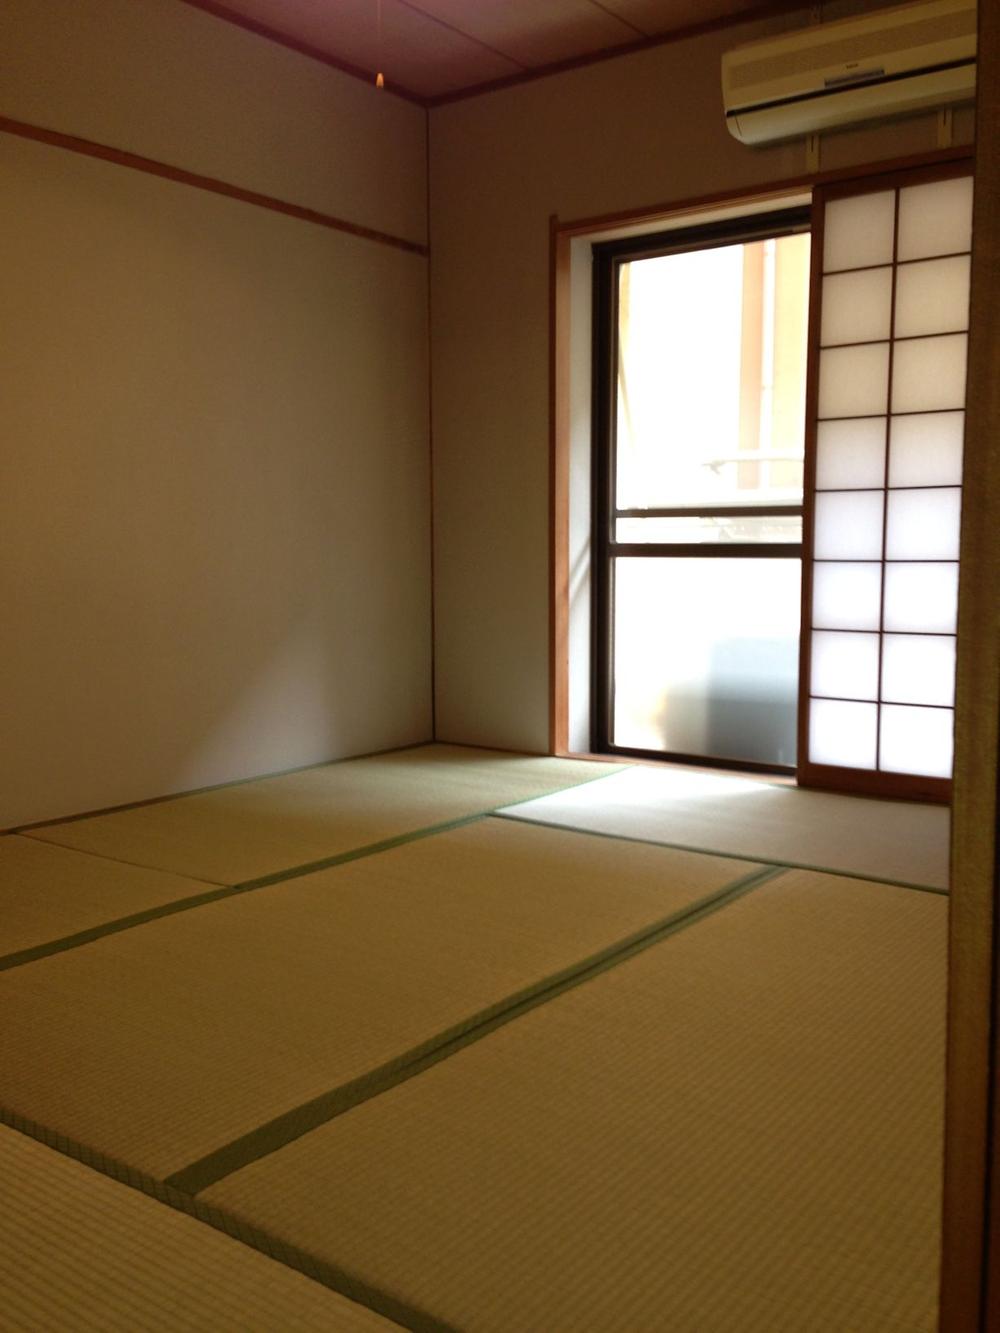 Other introspection. Japanese-style room (south-facing)